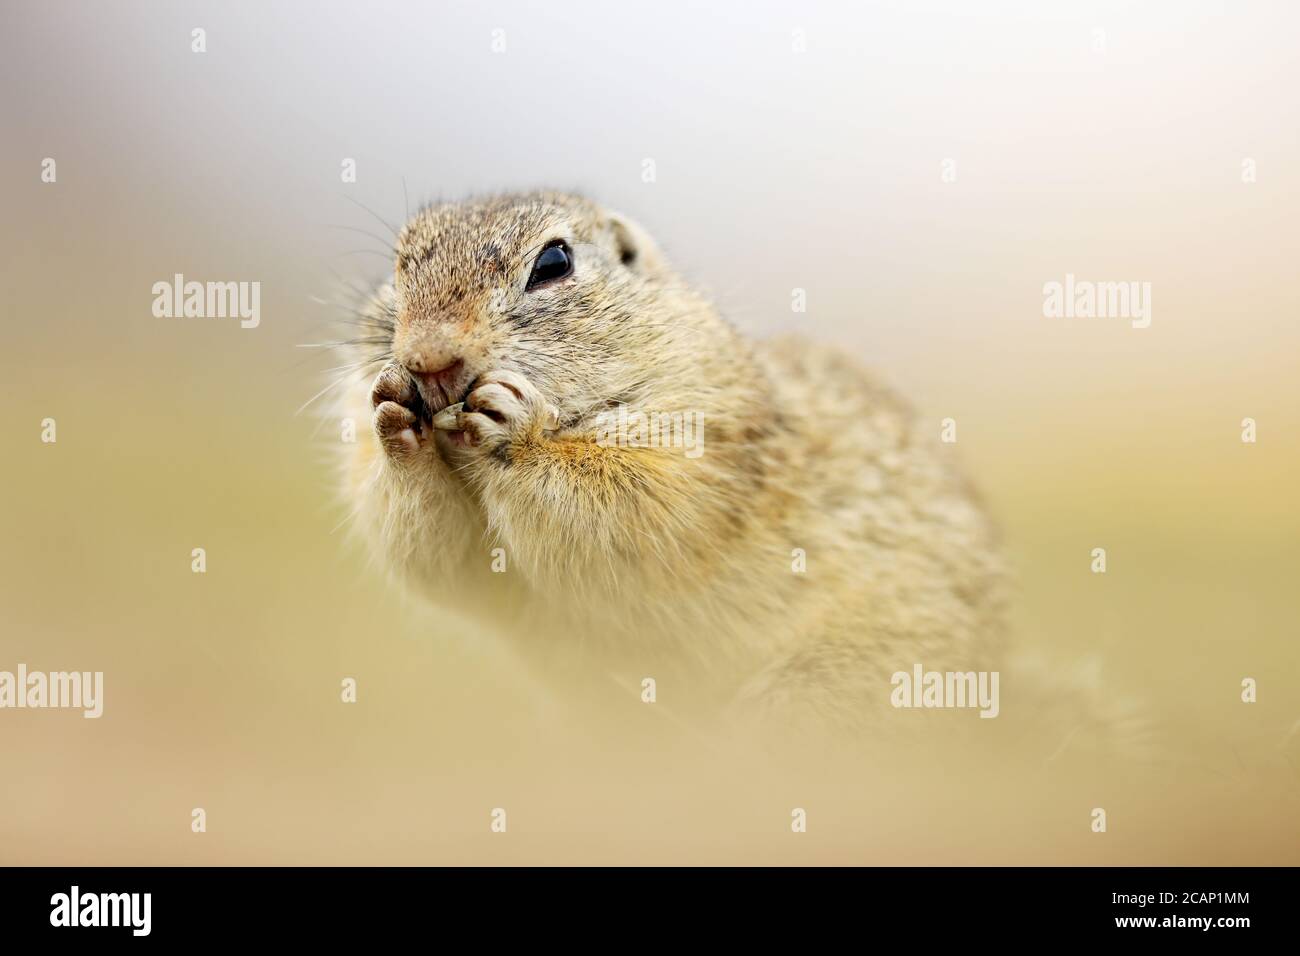 Ground Squirrel, Spermophilus citellus,eating seeds and  sitting in the grass during late summer afternoon, detail animal portrait, Czech Republic, Eu Stock Photo